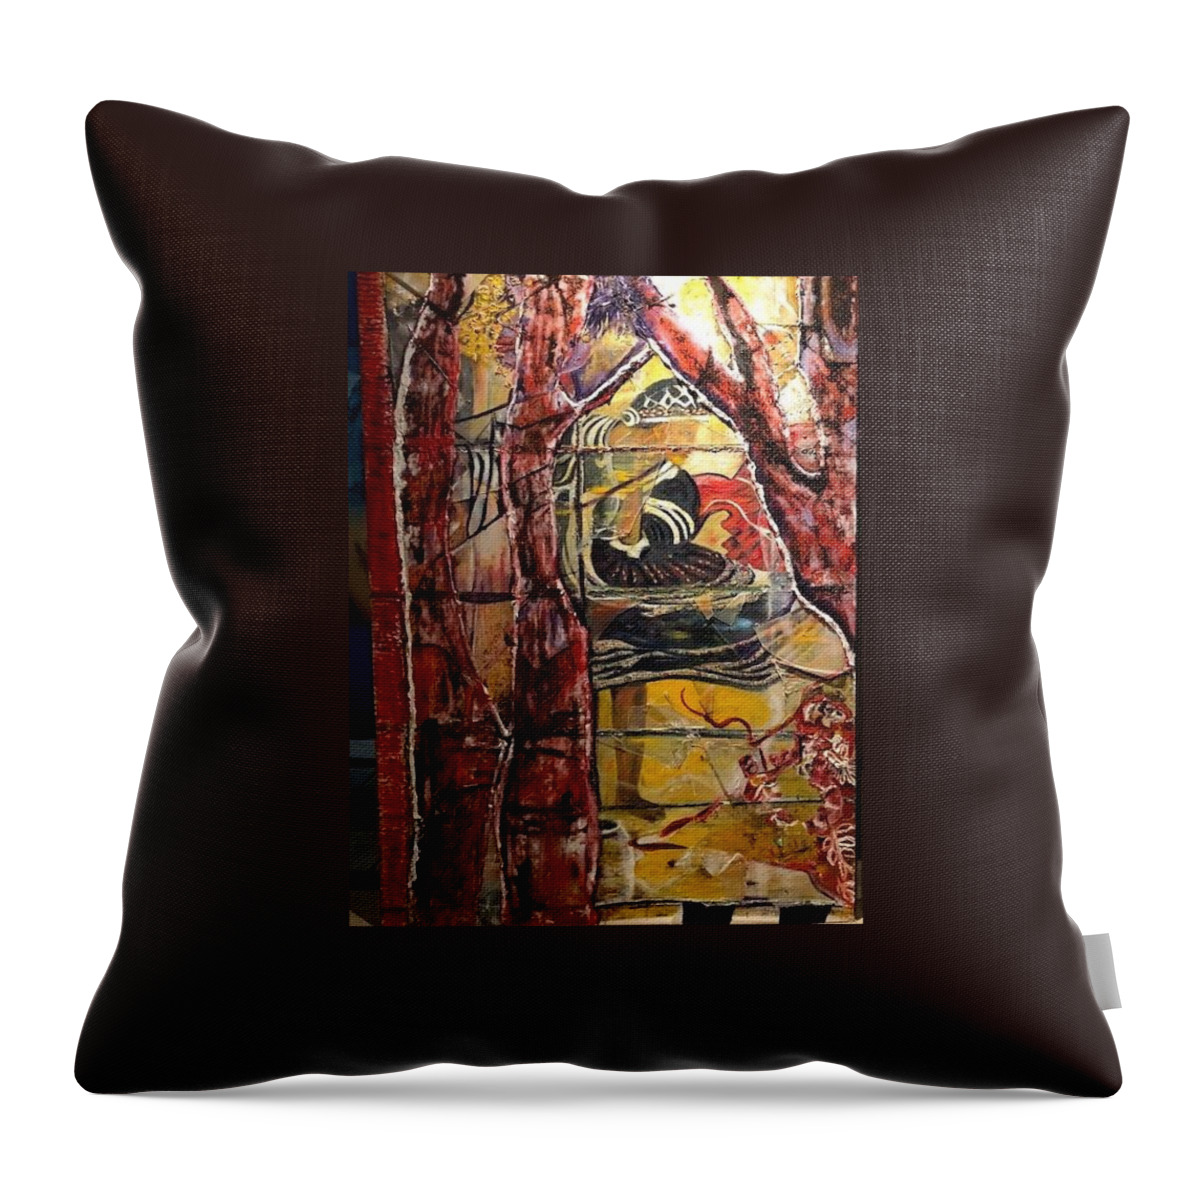 Dancing Throw Pillow featuring the painting Celebration by Peggy Blood